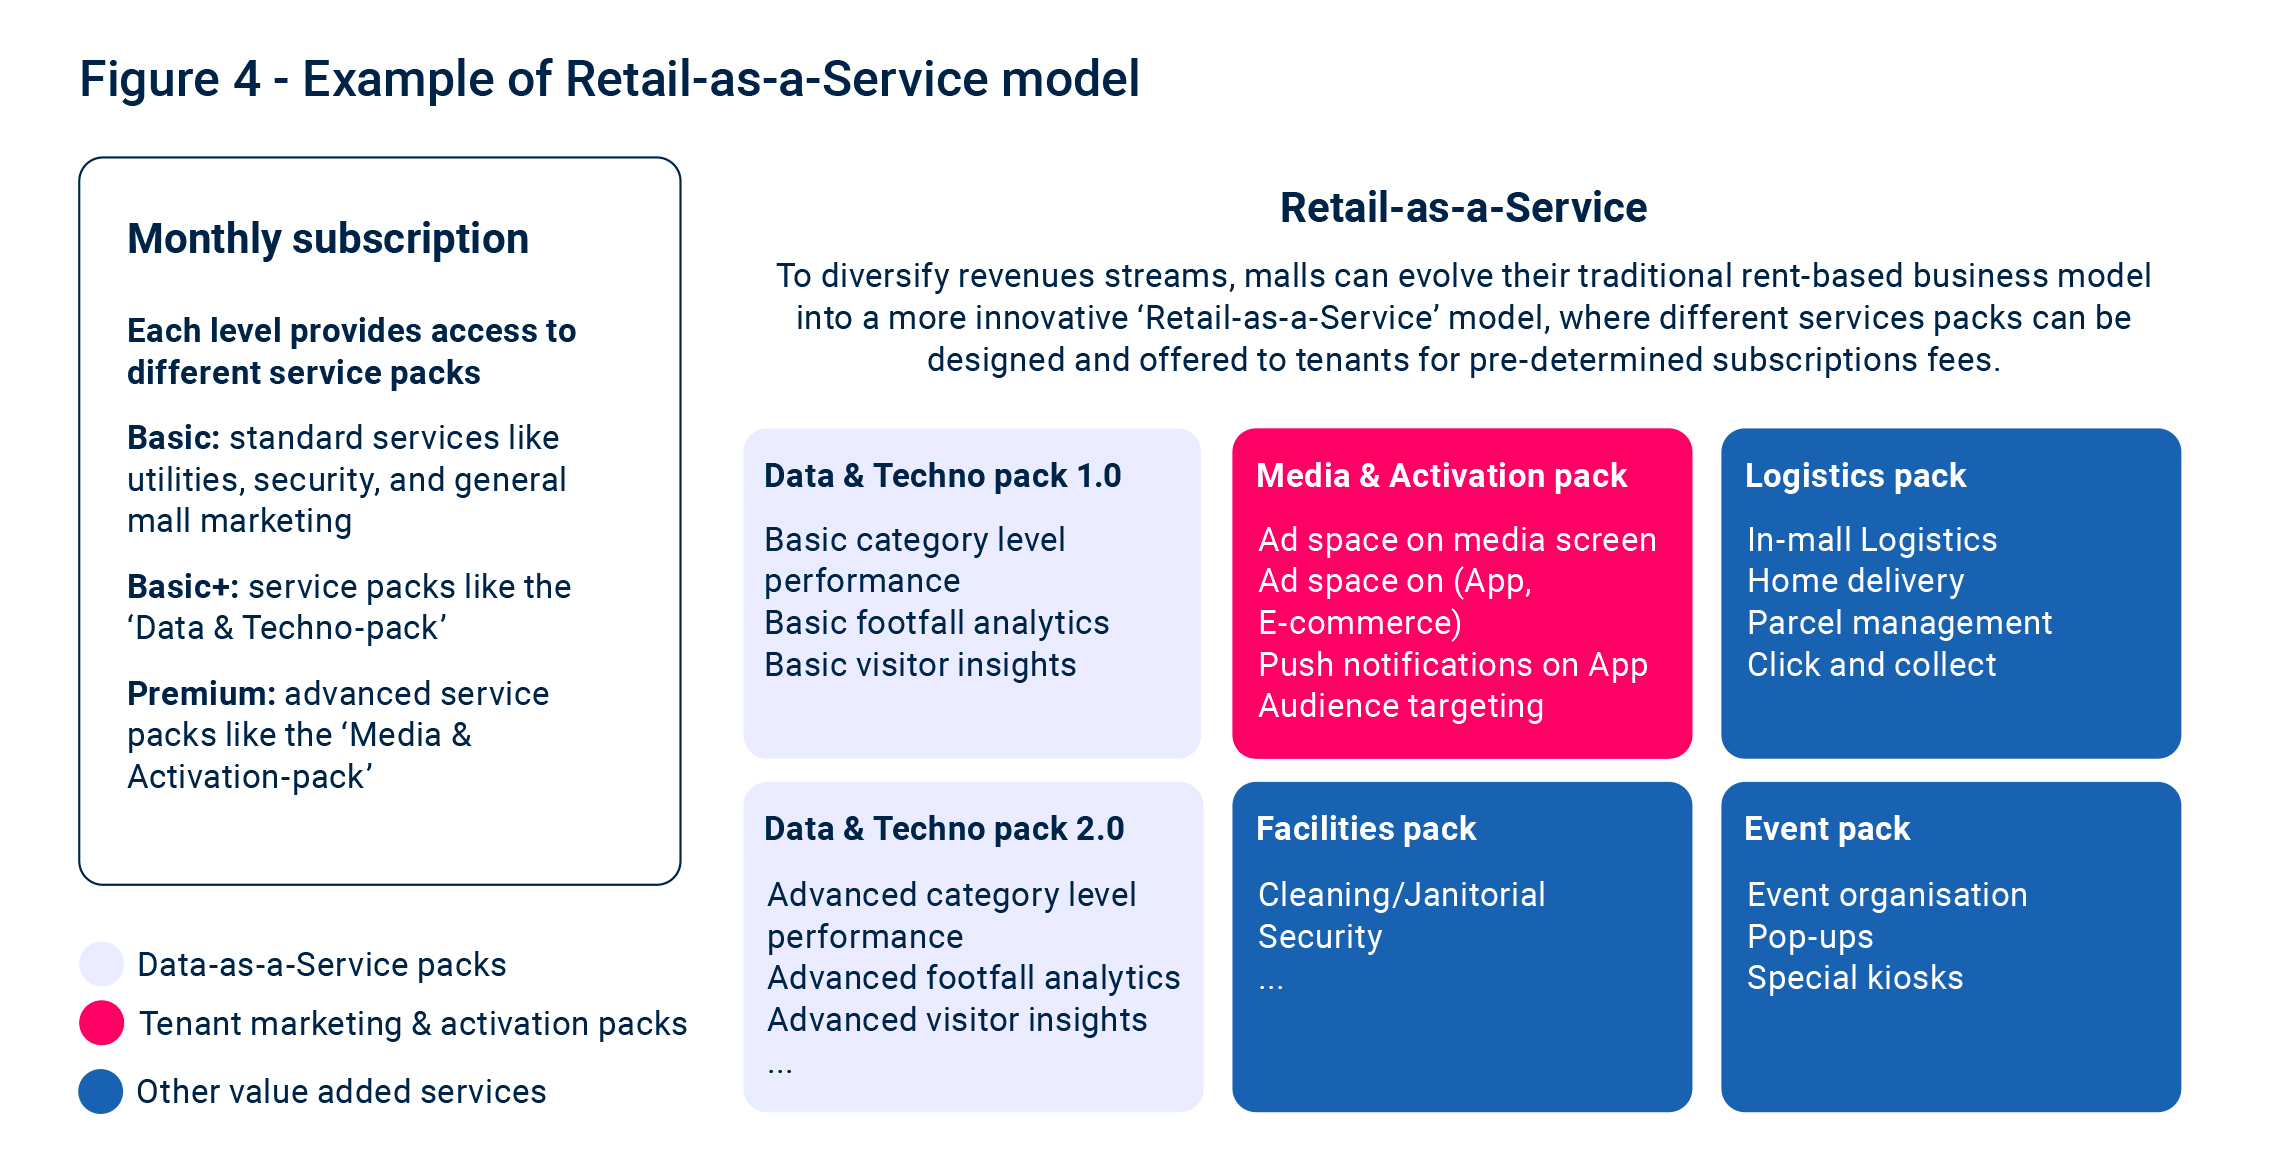 Malls - Figure 4 - Example of Retail-as-a-Service model